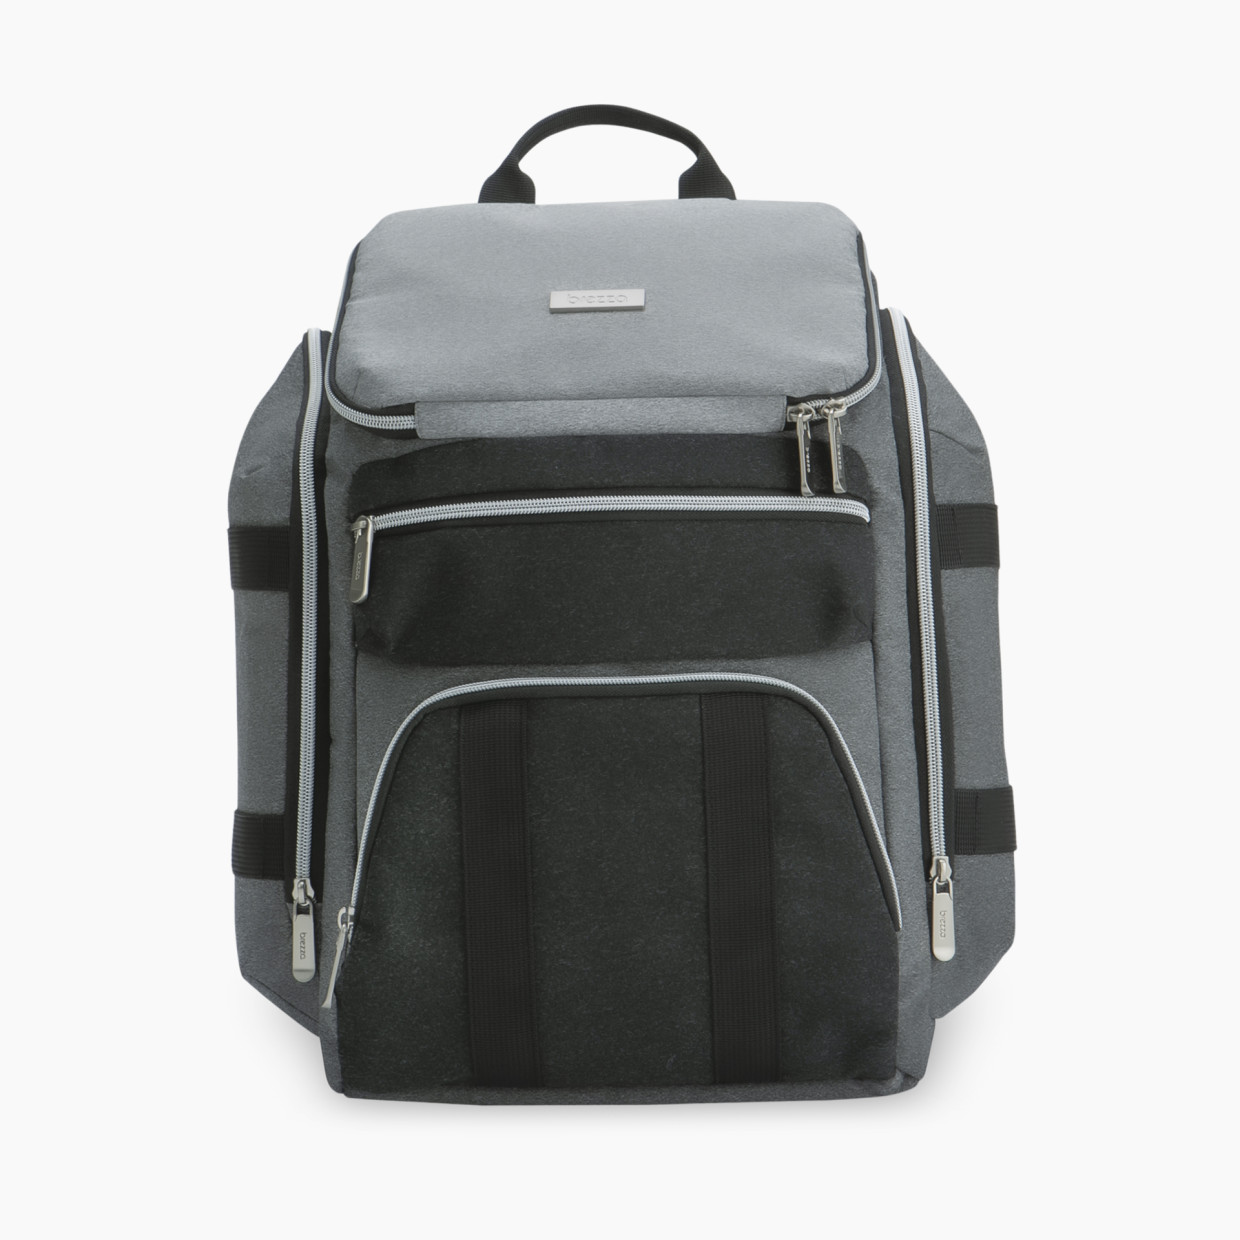 Baby Brezza Ultimate Changing Station Backpack - Grey/Black Trim.